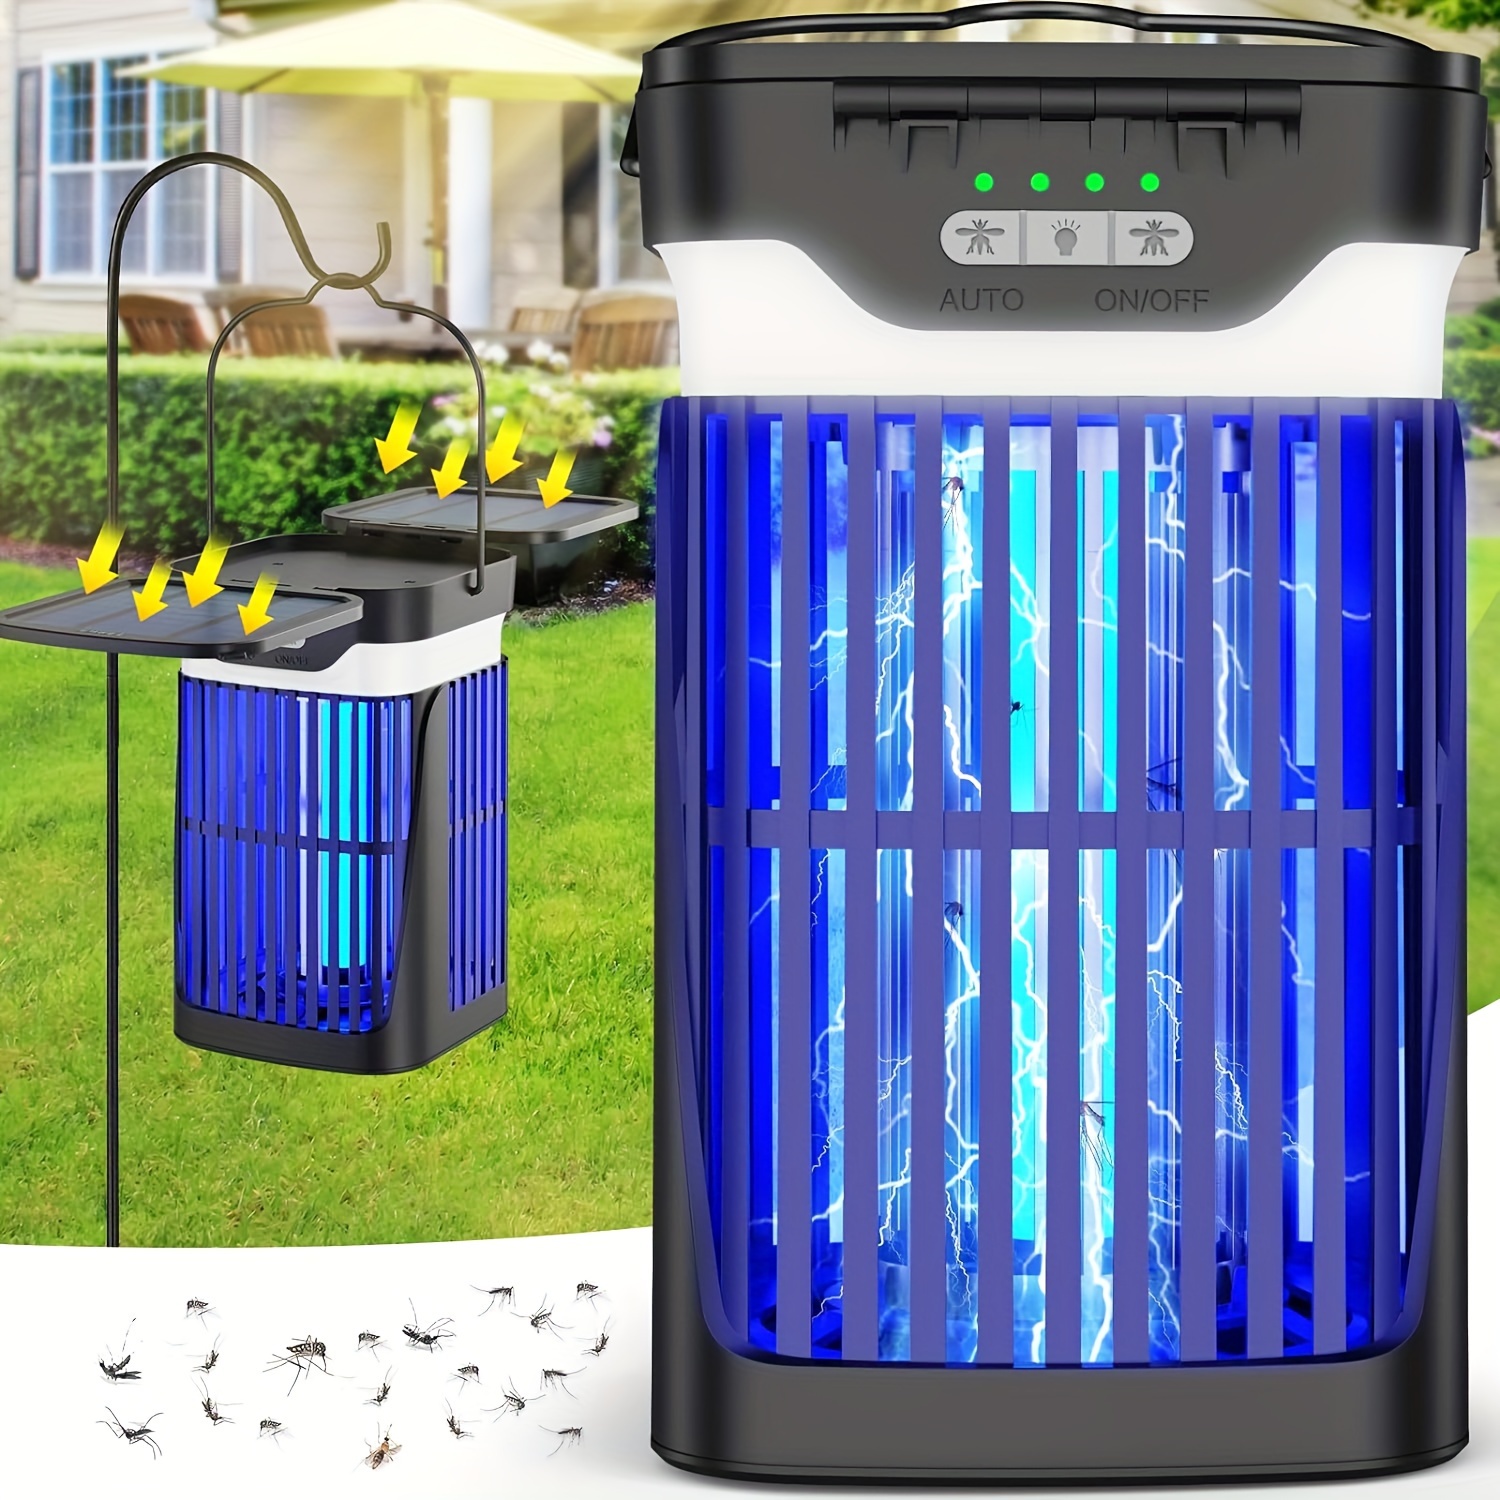 

Solar Bug Zapper Outdoor And Indoor, Dual Folding Solar Panel With Auto Sensor Function, Usb Rechargeable Cordless Fly Traps, Electric Mosquito Killer For Patio, Backyard, Garden, Camping